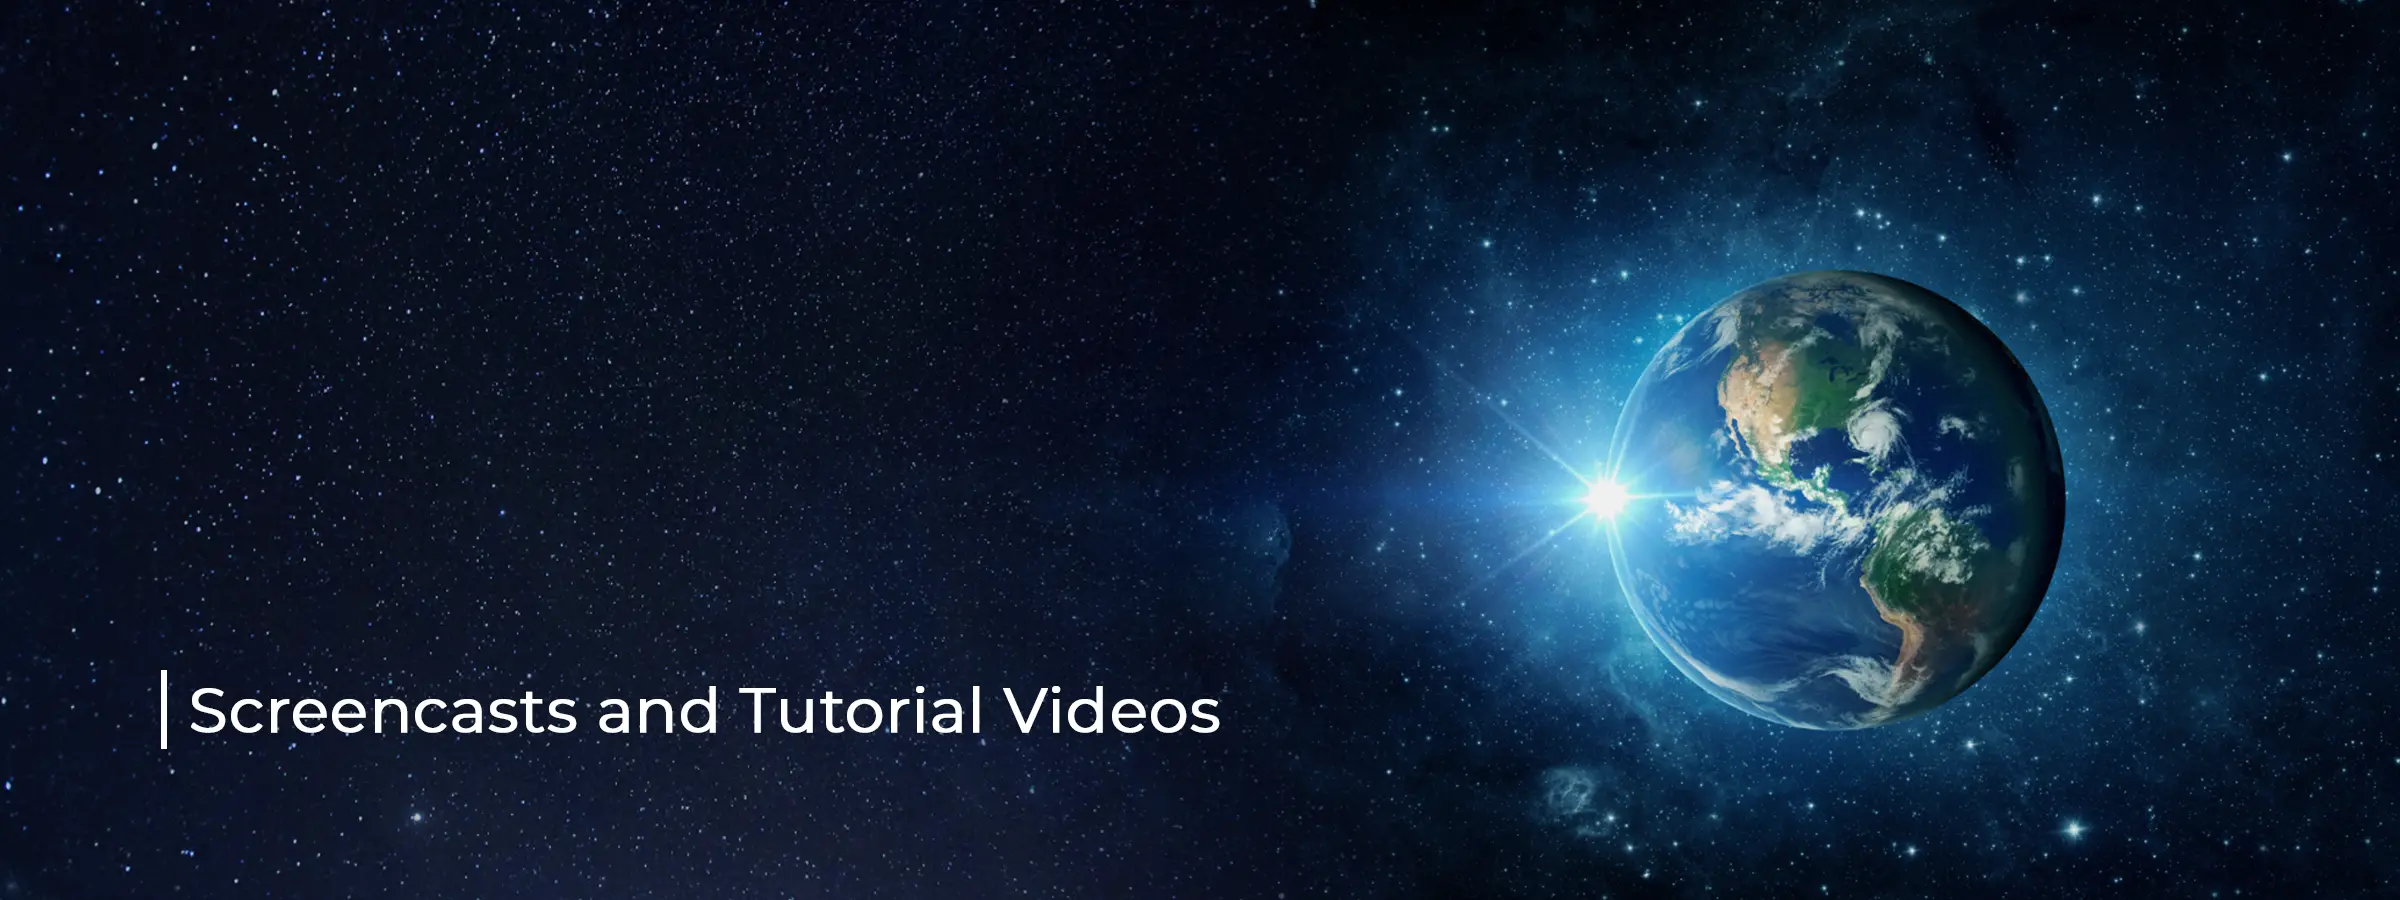 screencasts-and-tutorial-videos-services